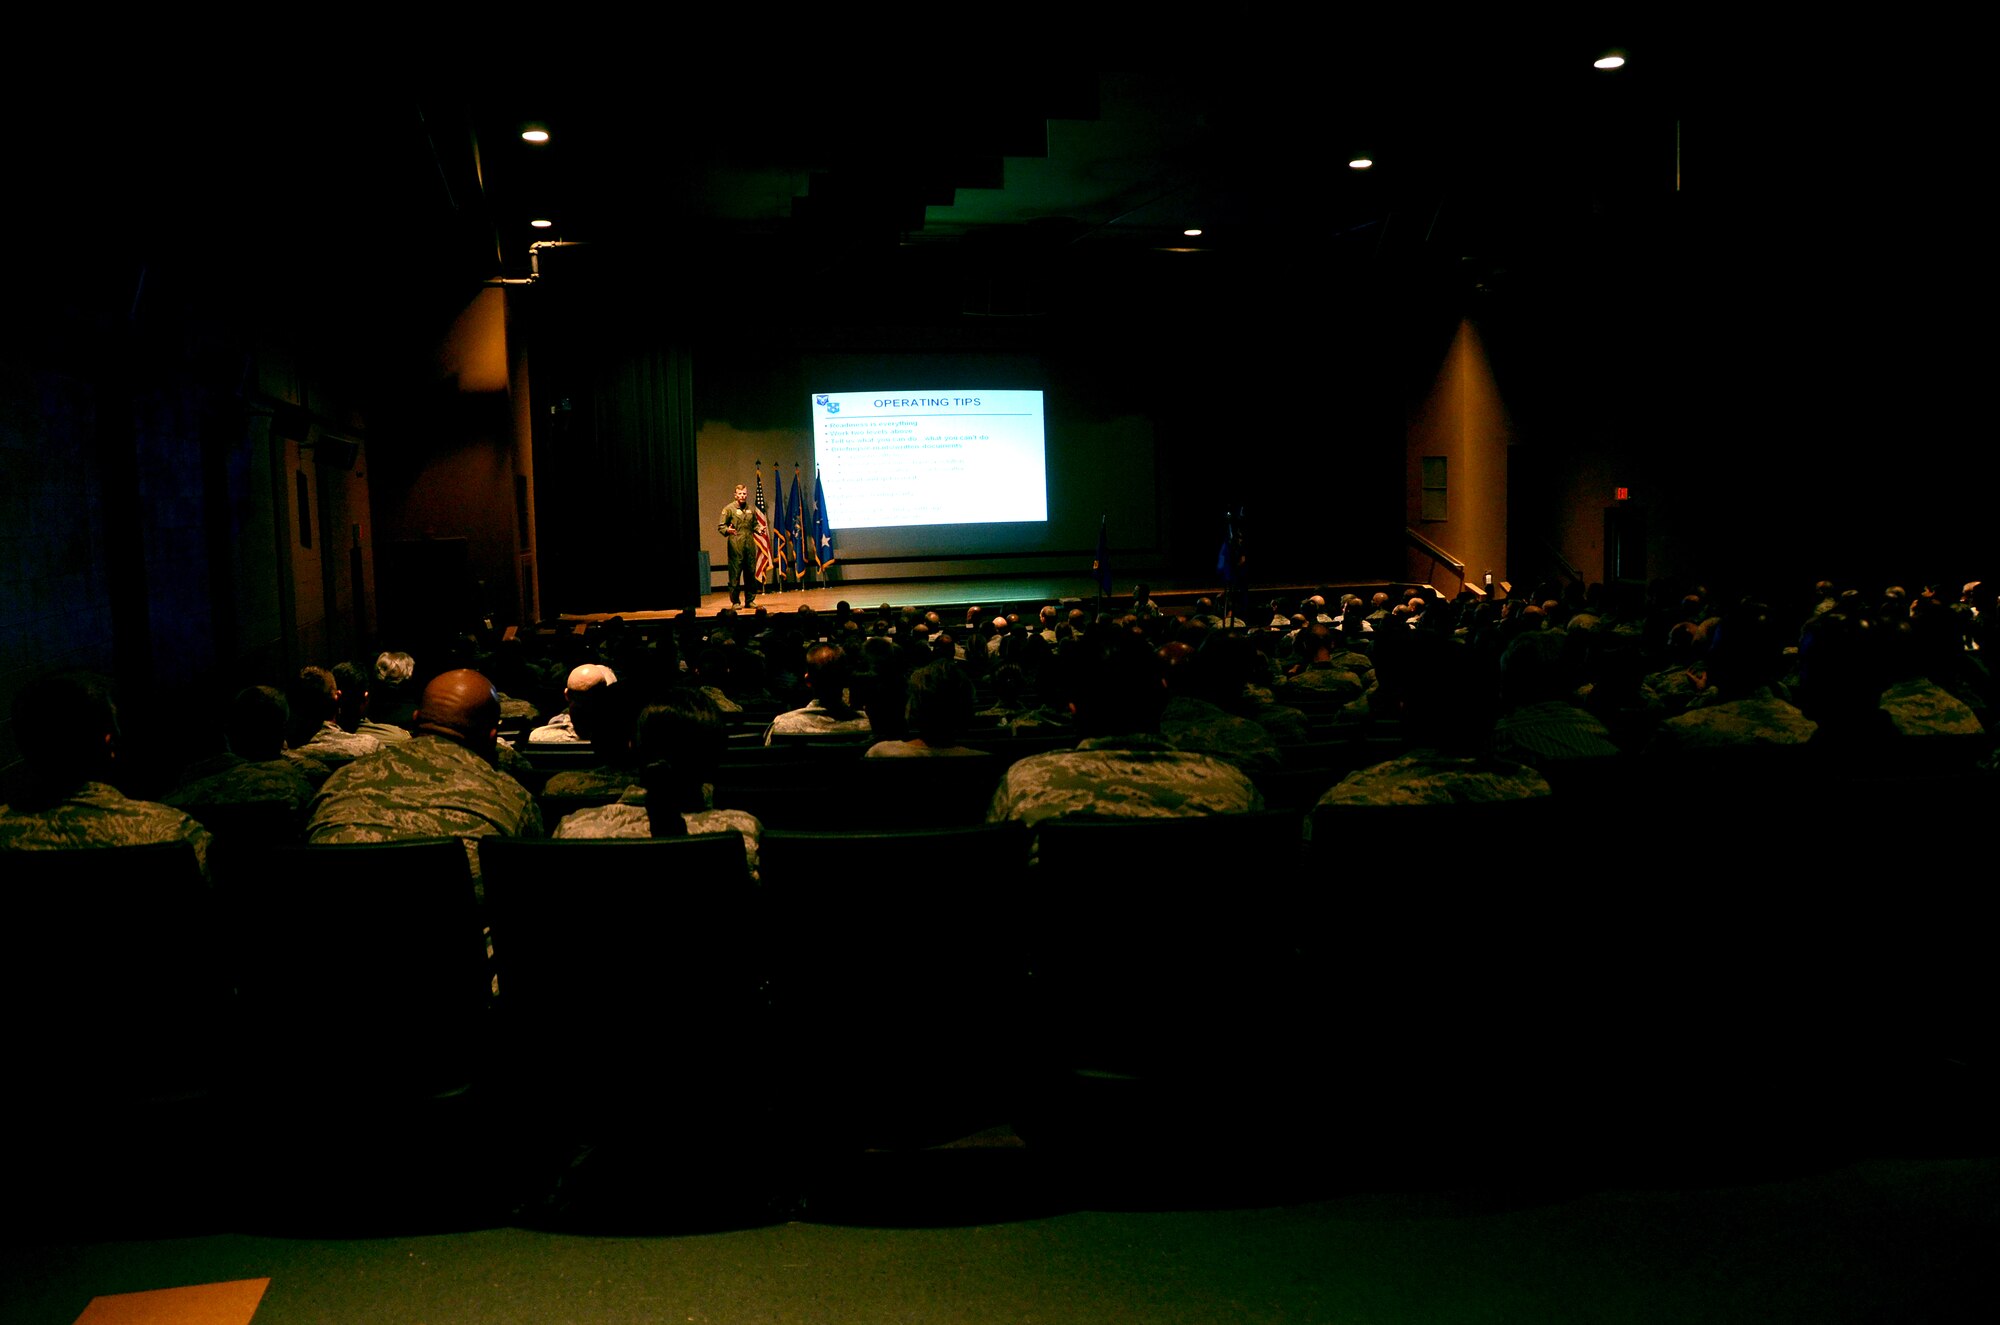 Lt. Gen Tod Wolters, Commander 12th Air Force (Air Forces Southern), addresses his Airmen during a commander’s call on Davis-Monthan AFB, Ariz., Sept. 26, 2013.  Wolters presented operating tips of what he expects of the unit.  His operating tips include keeping readiness up as well as anticipating the needs of your chain of commands.  (U.S. Air Force photo by Staff Sgt. Heather R. Redman/Released)